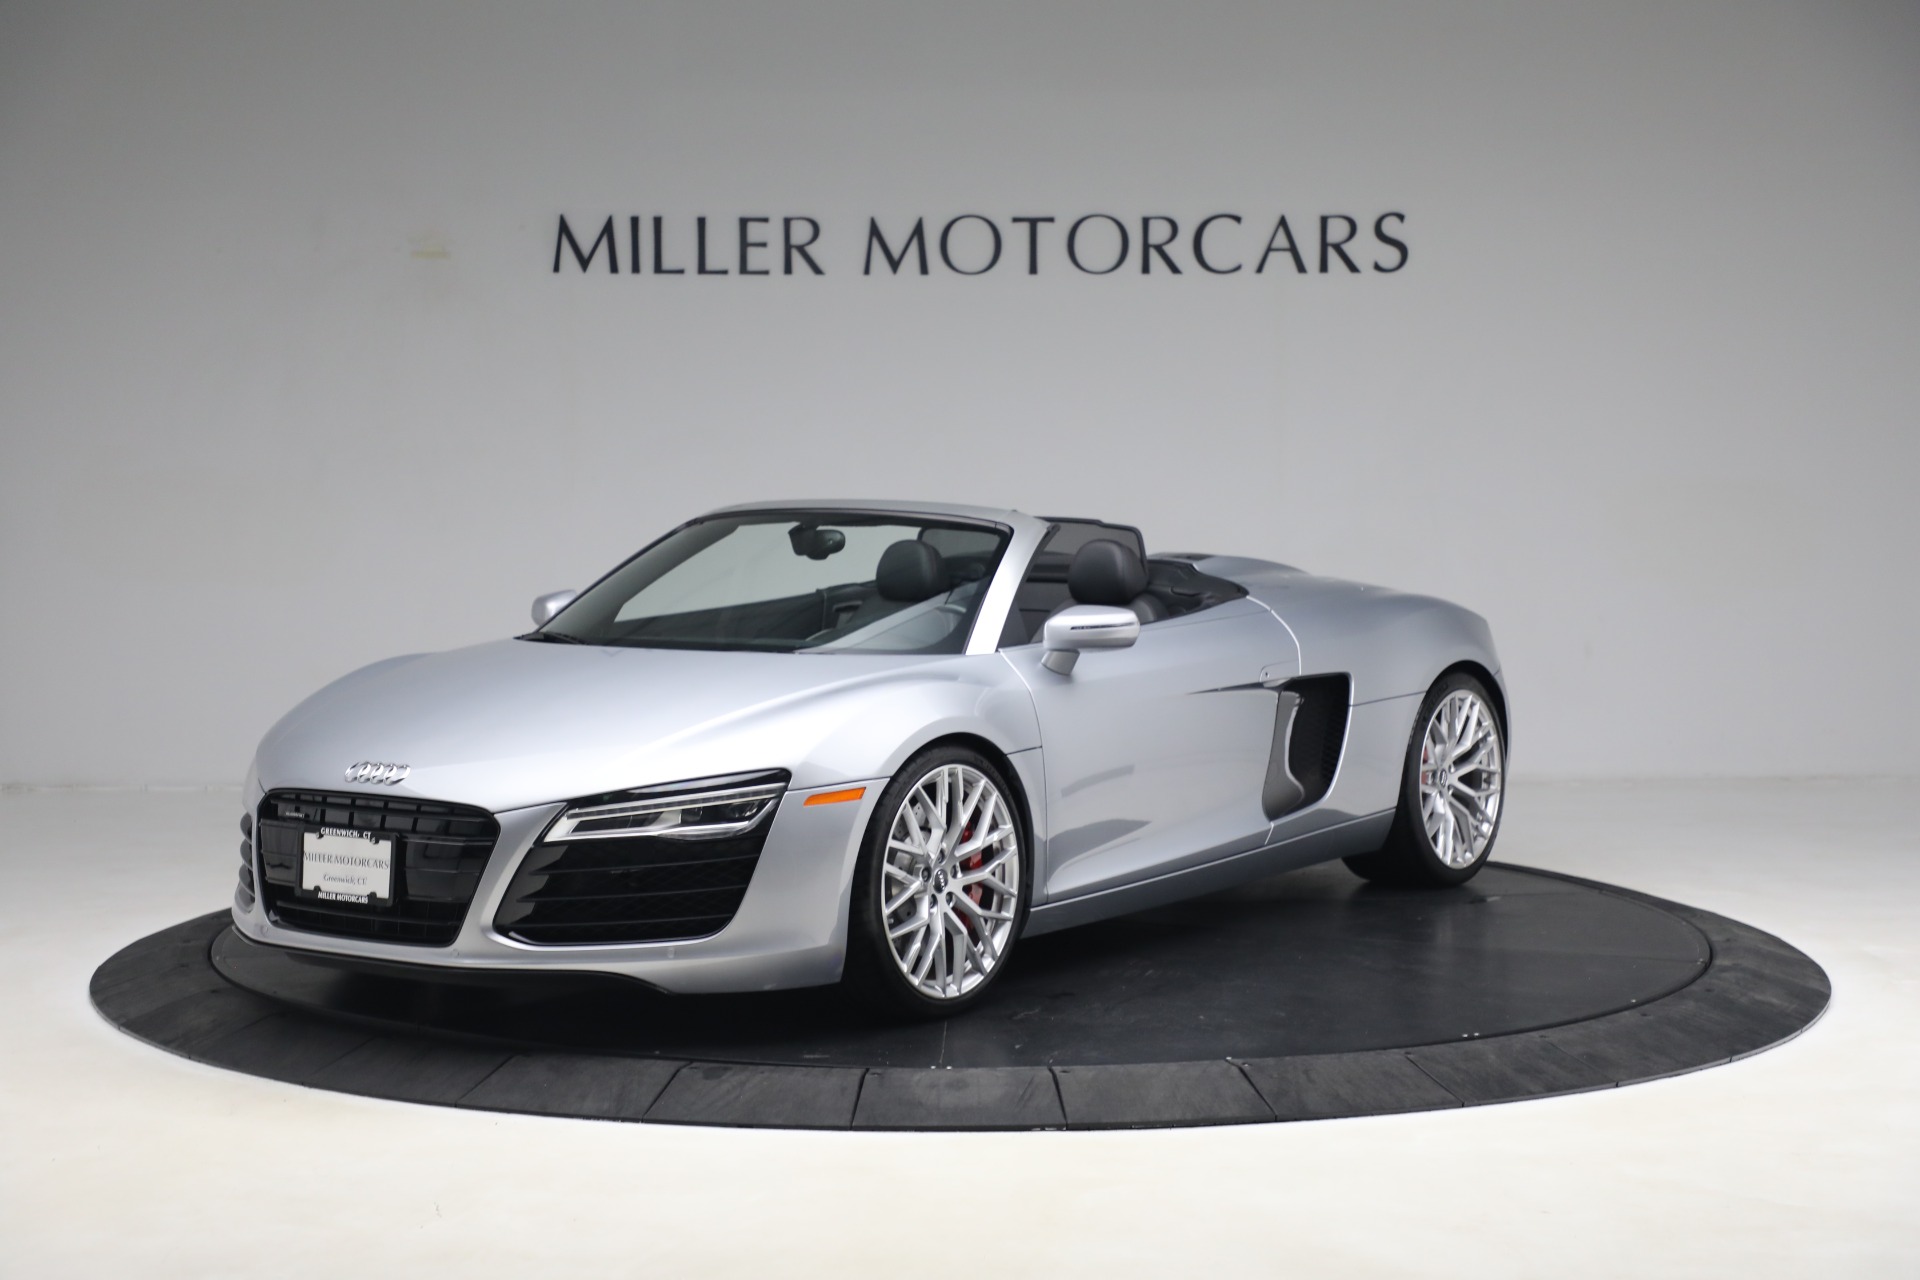 Used 2015 Audi R8 4.2 quattro Spyder for sale $149,900 at McLaren Greenwich in Greenwich CT 06830 1